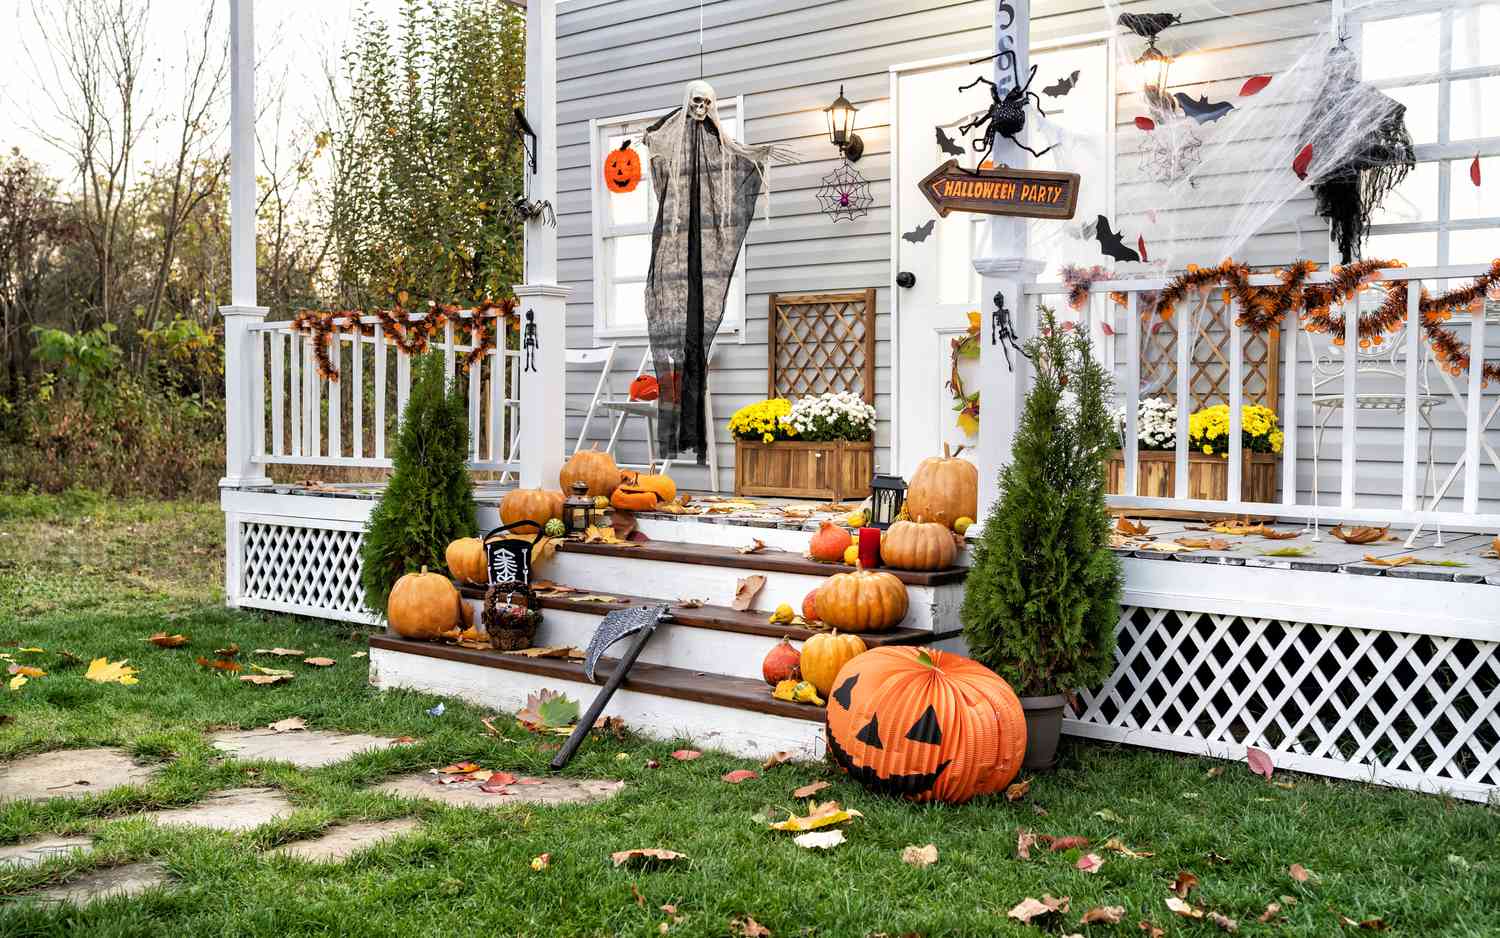 How To Keep Outdoor Decorations From Blowing Over